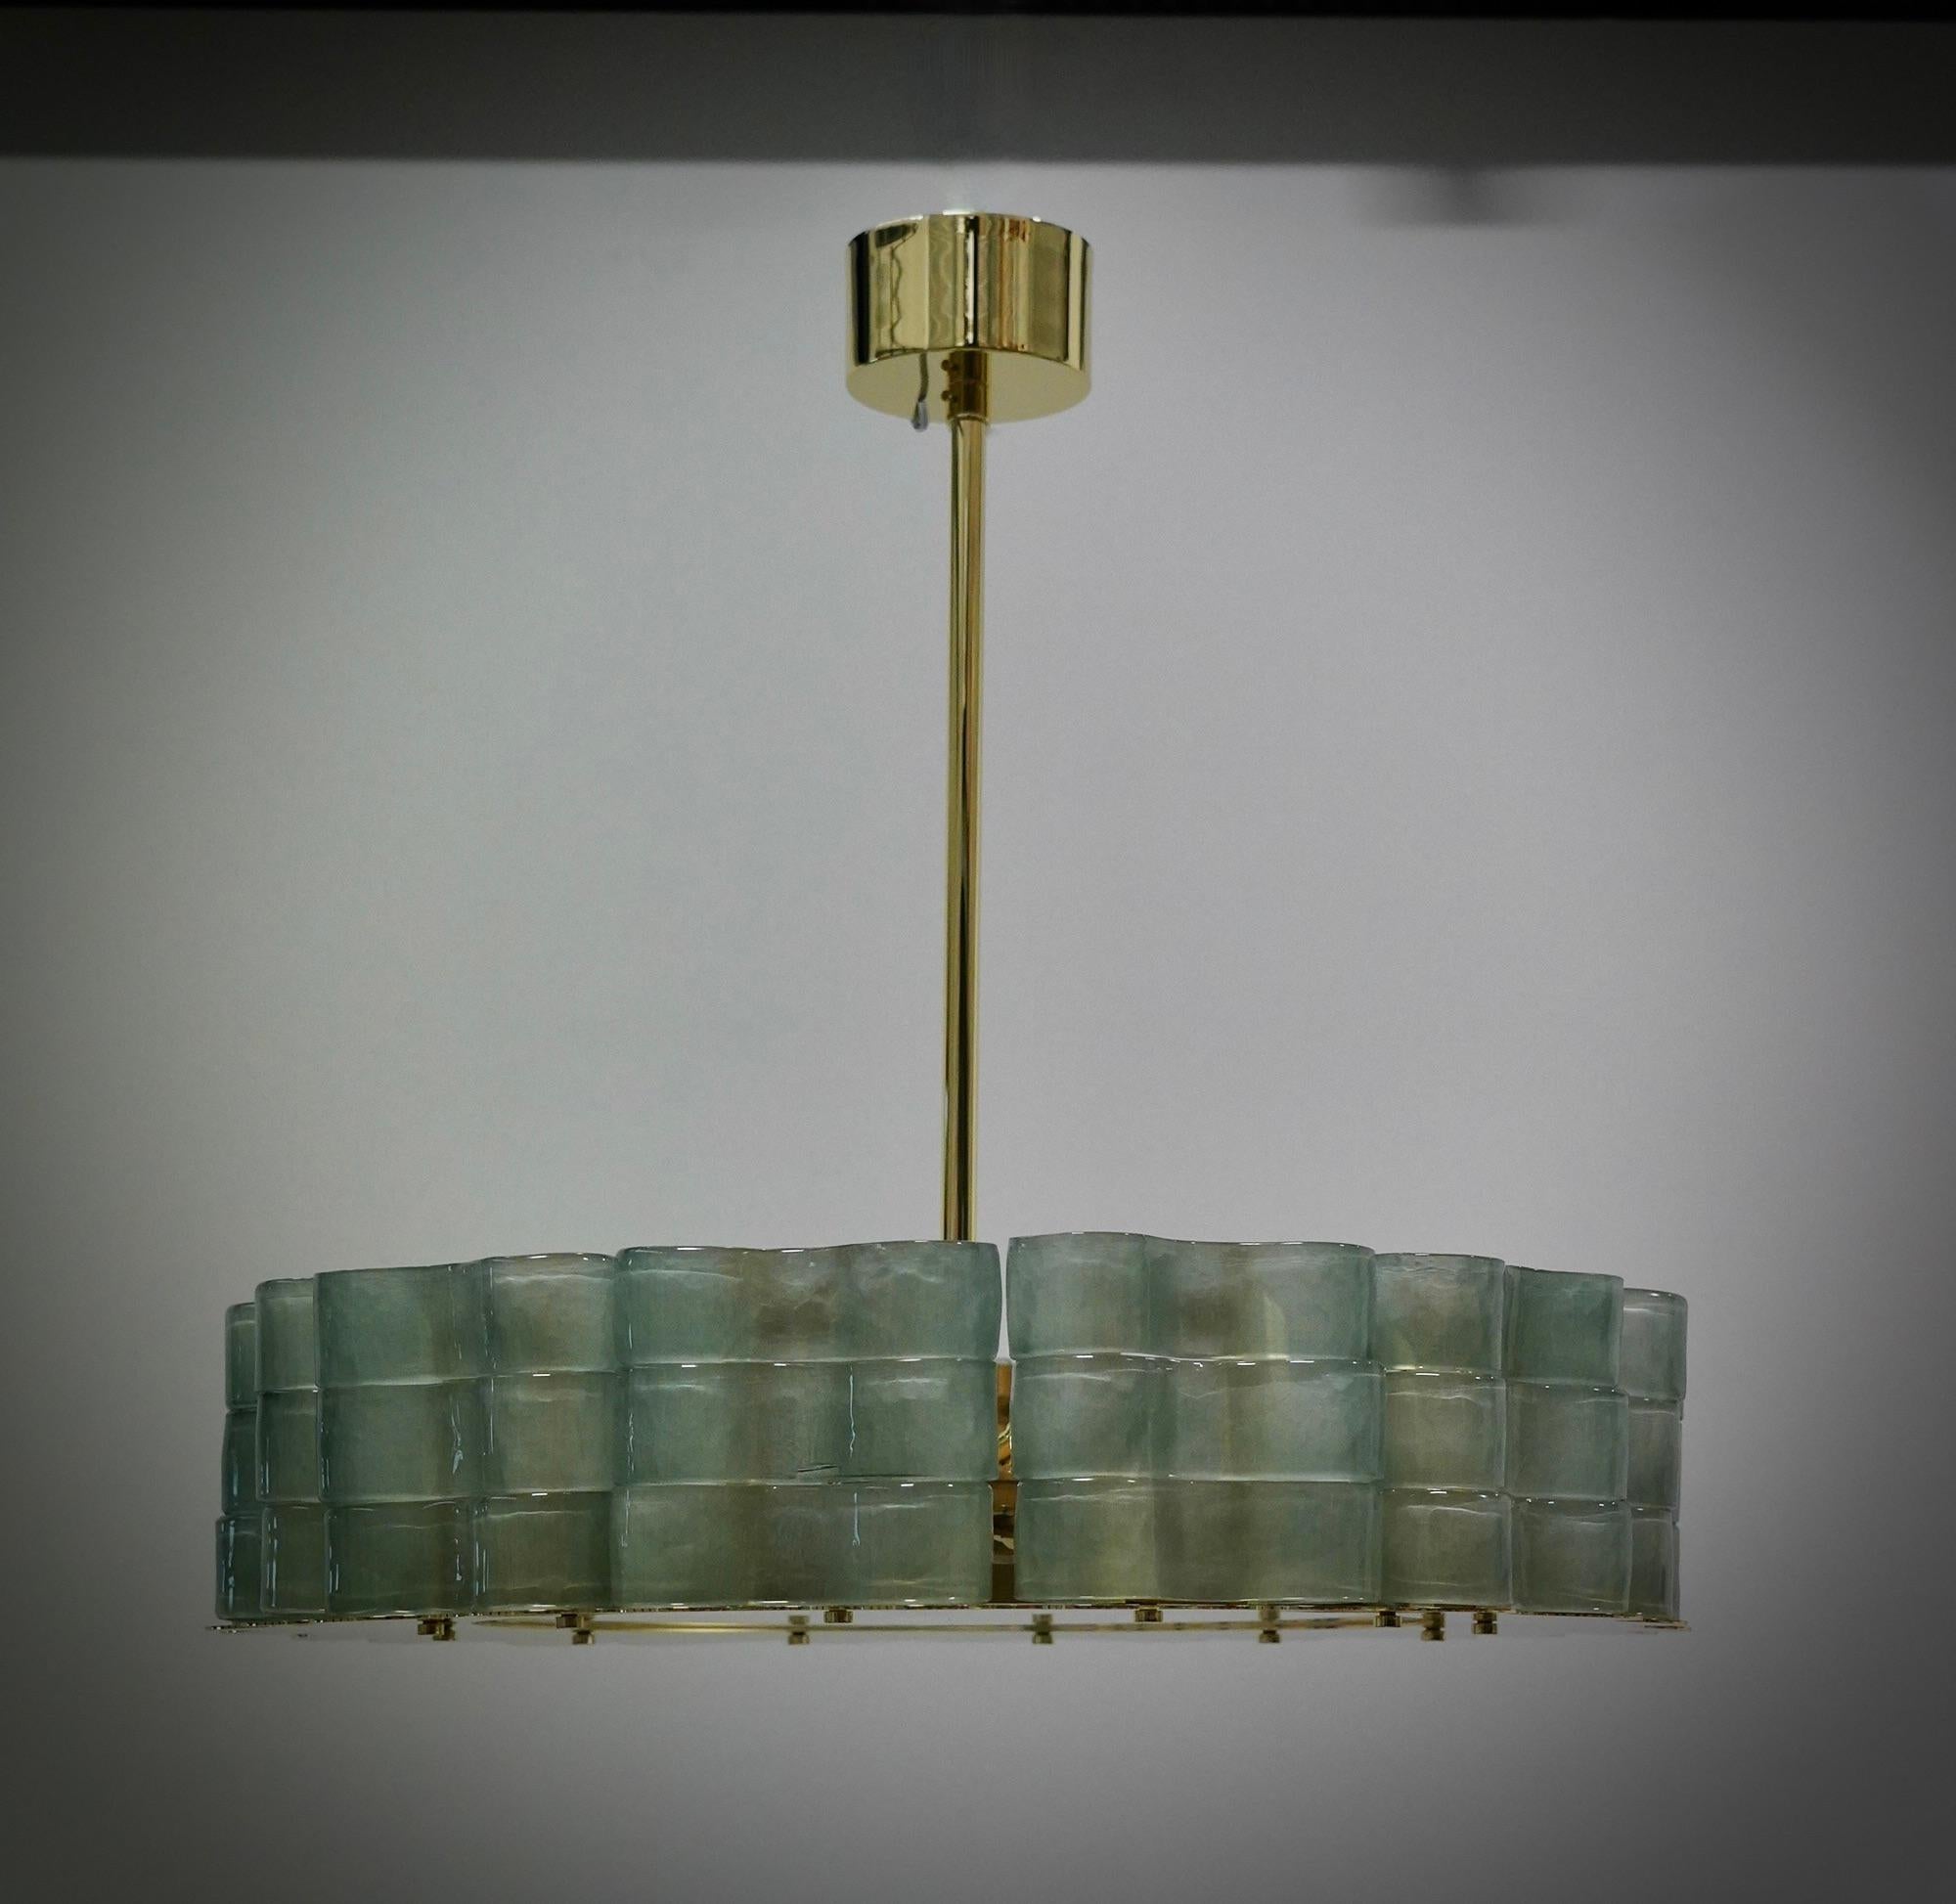 Fantastic round chandelier in Murano glass and polished brass. Note the shape of the blue Murano glass curls, very beautiful and particular. Simple but very elegant linear Murano chandelier.

Murano chandelier in artistic glass and brass. Formed by